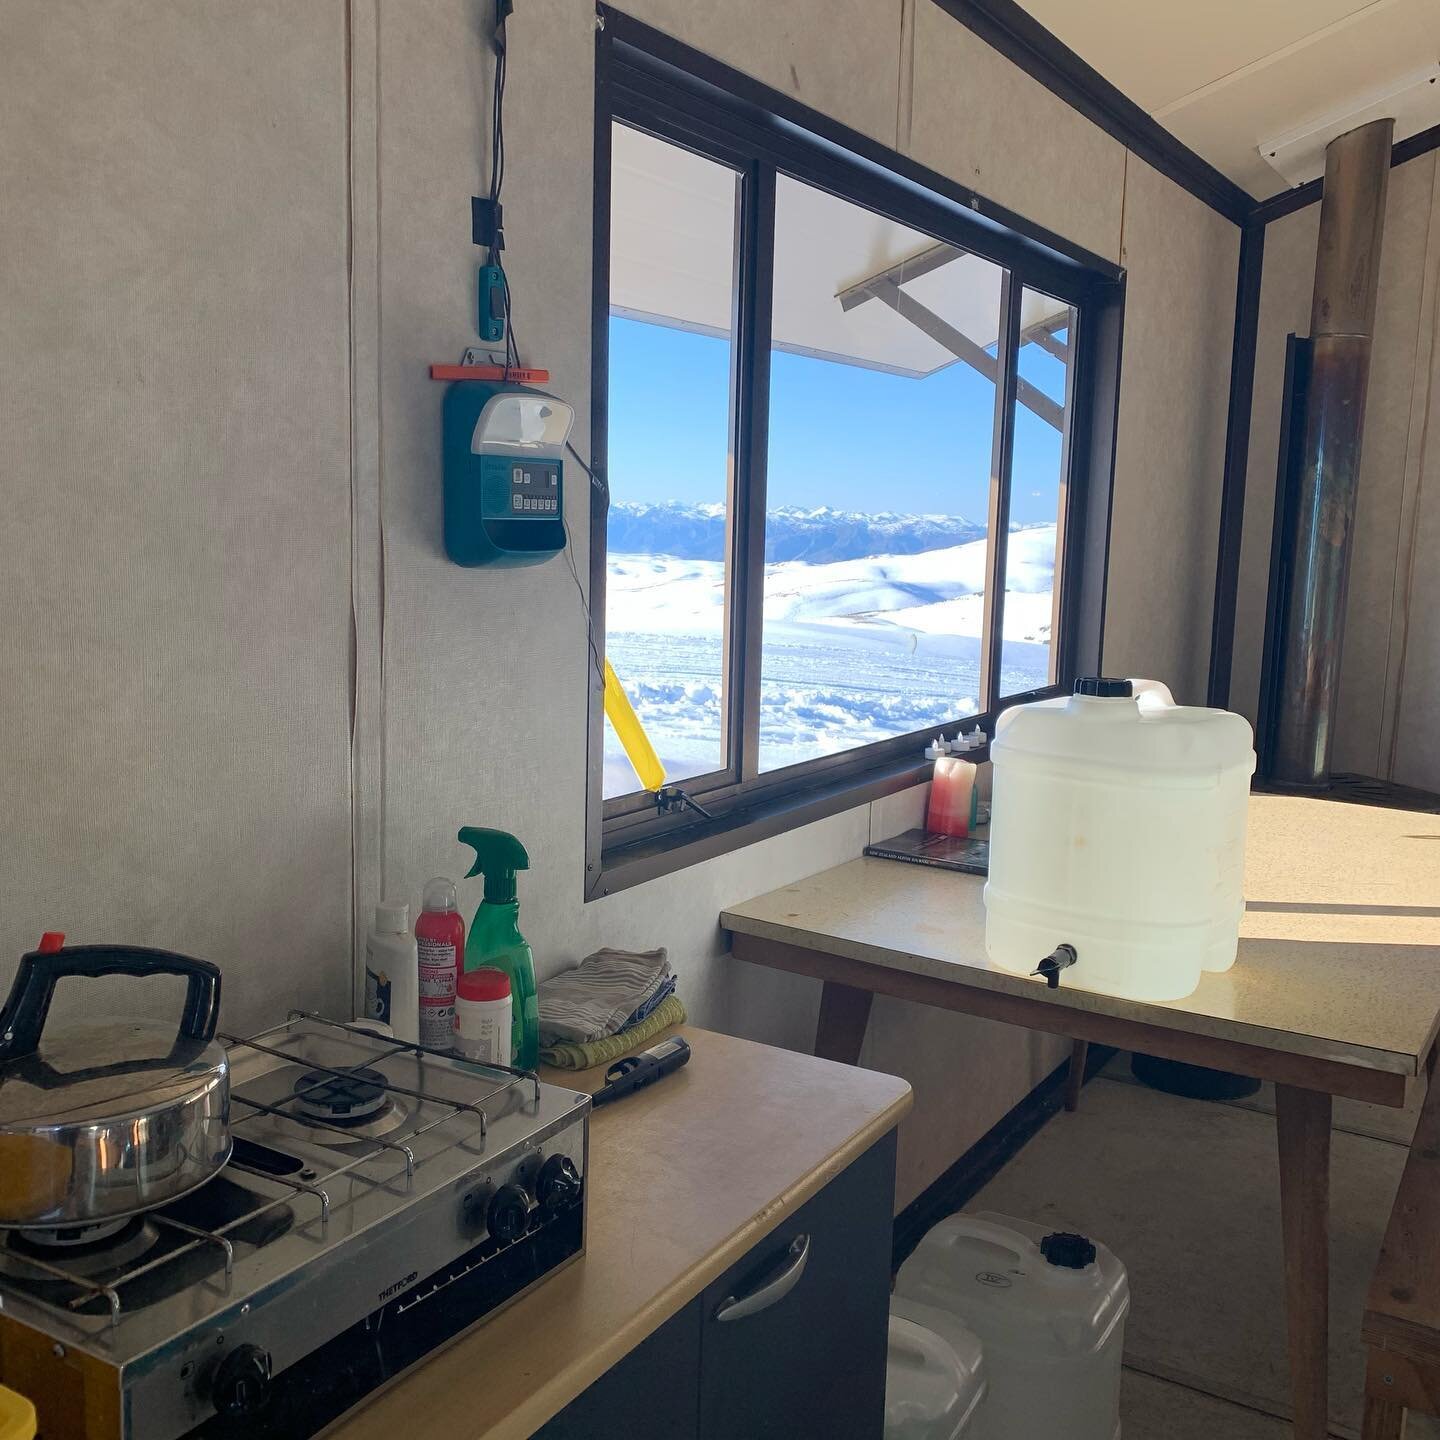 Mountain hut kitchen view .. Happiest of all my kitchen spaces .. I love the rustic nature of a mountain hut cooking space .. the &lsquo;making do&rsquo; nature of cooking with whatever cookware that&rsquo;s there and with whatever ingredients you ha